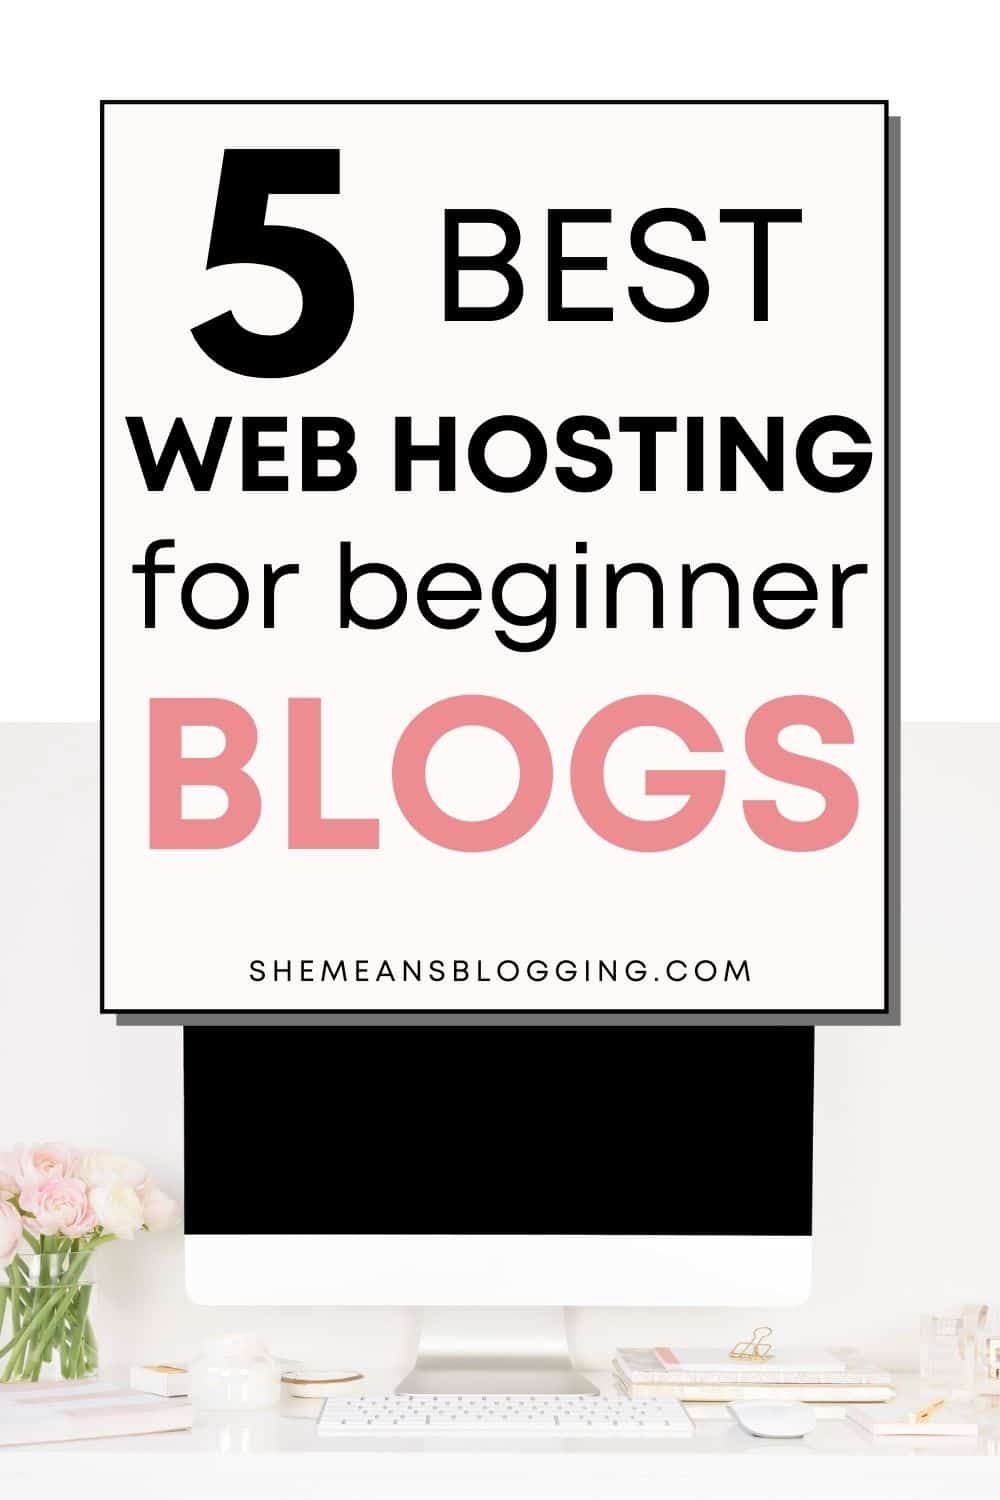 The best web hosting for blogs. Looking for cheap and affordable hosting plans for beginner bloggers? Check out 5 most affordable website hosting for beginners and small business. Best website hosting plans for new bloggers. 